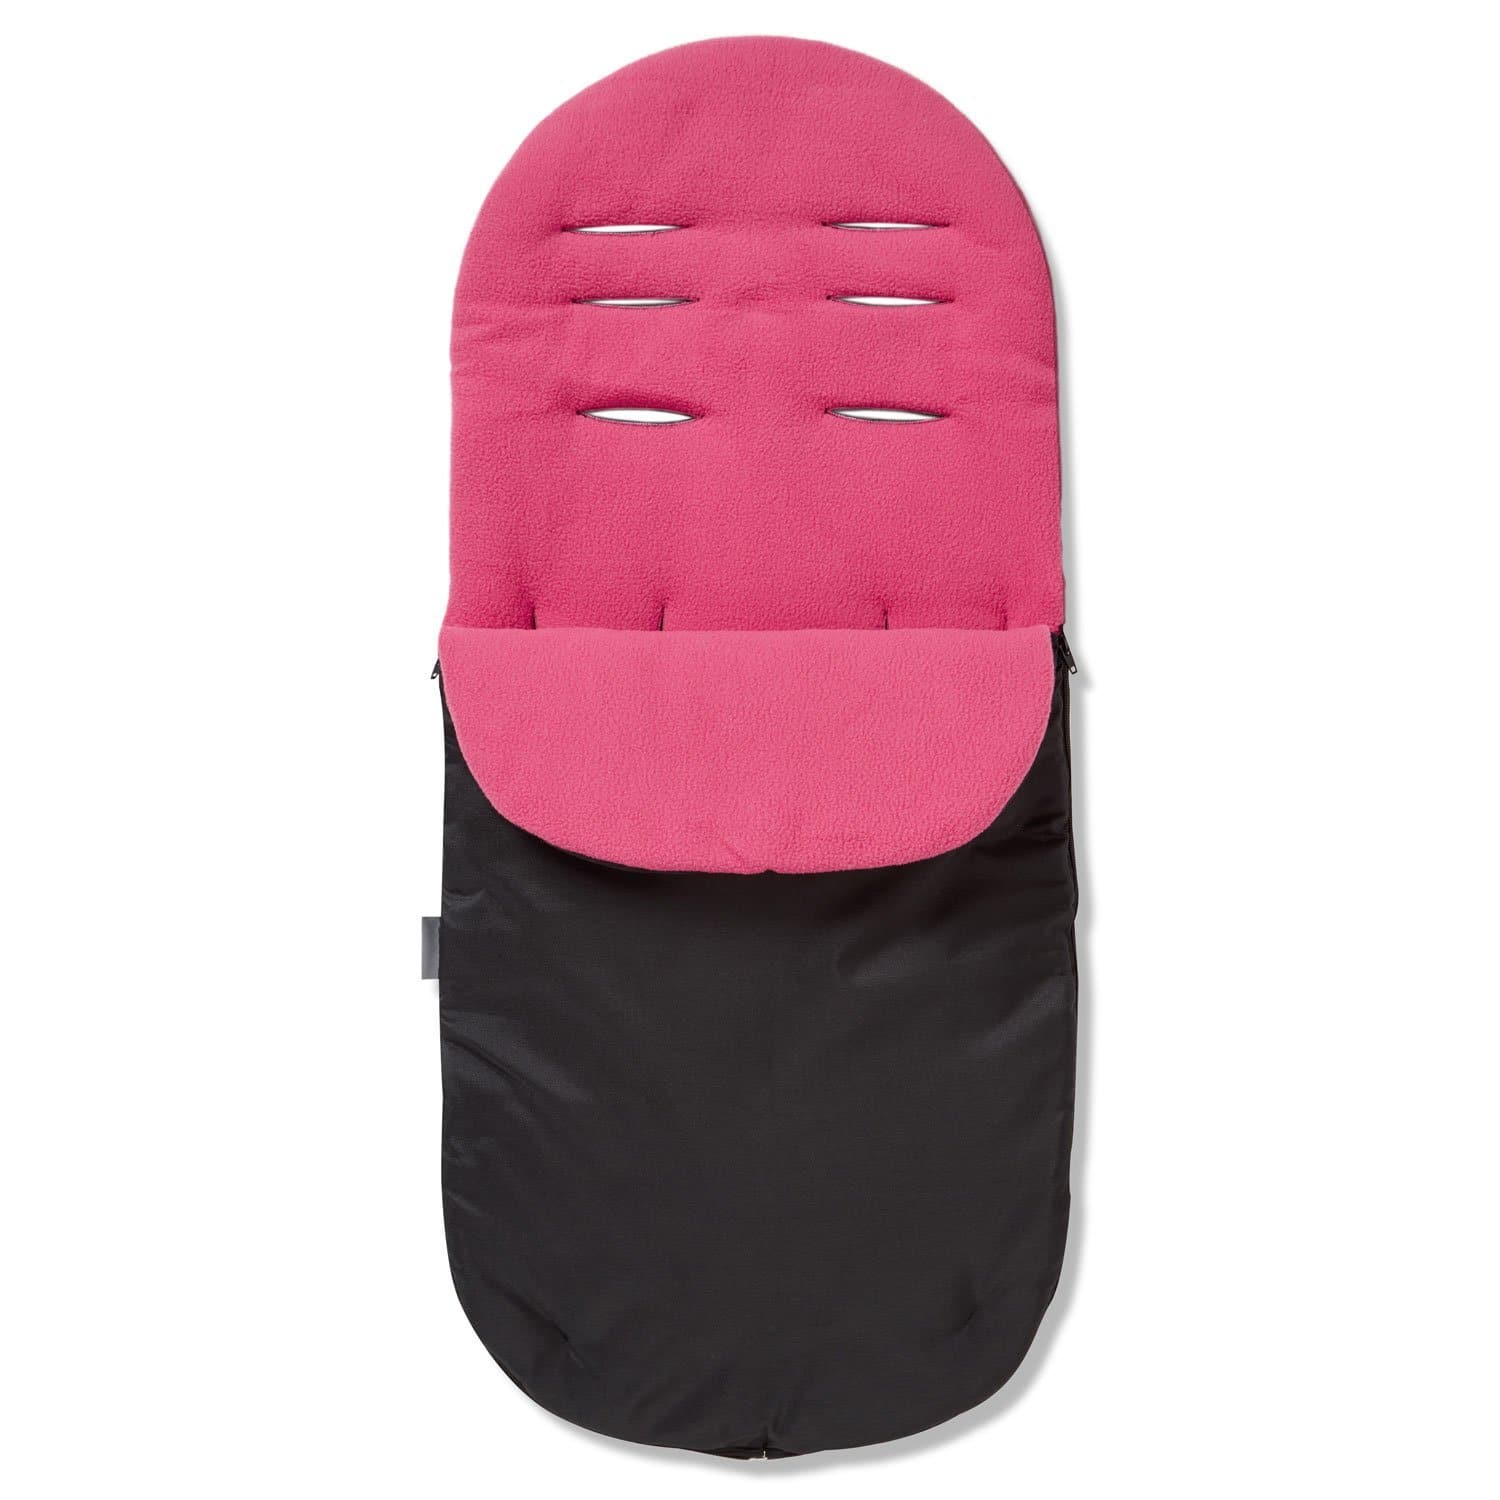 Footmuff / Cosy Toes Compatible with Looping - For Your Little One